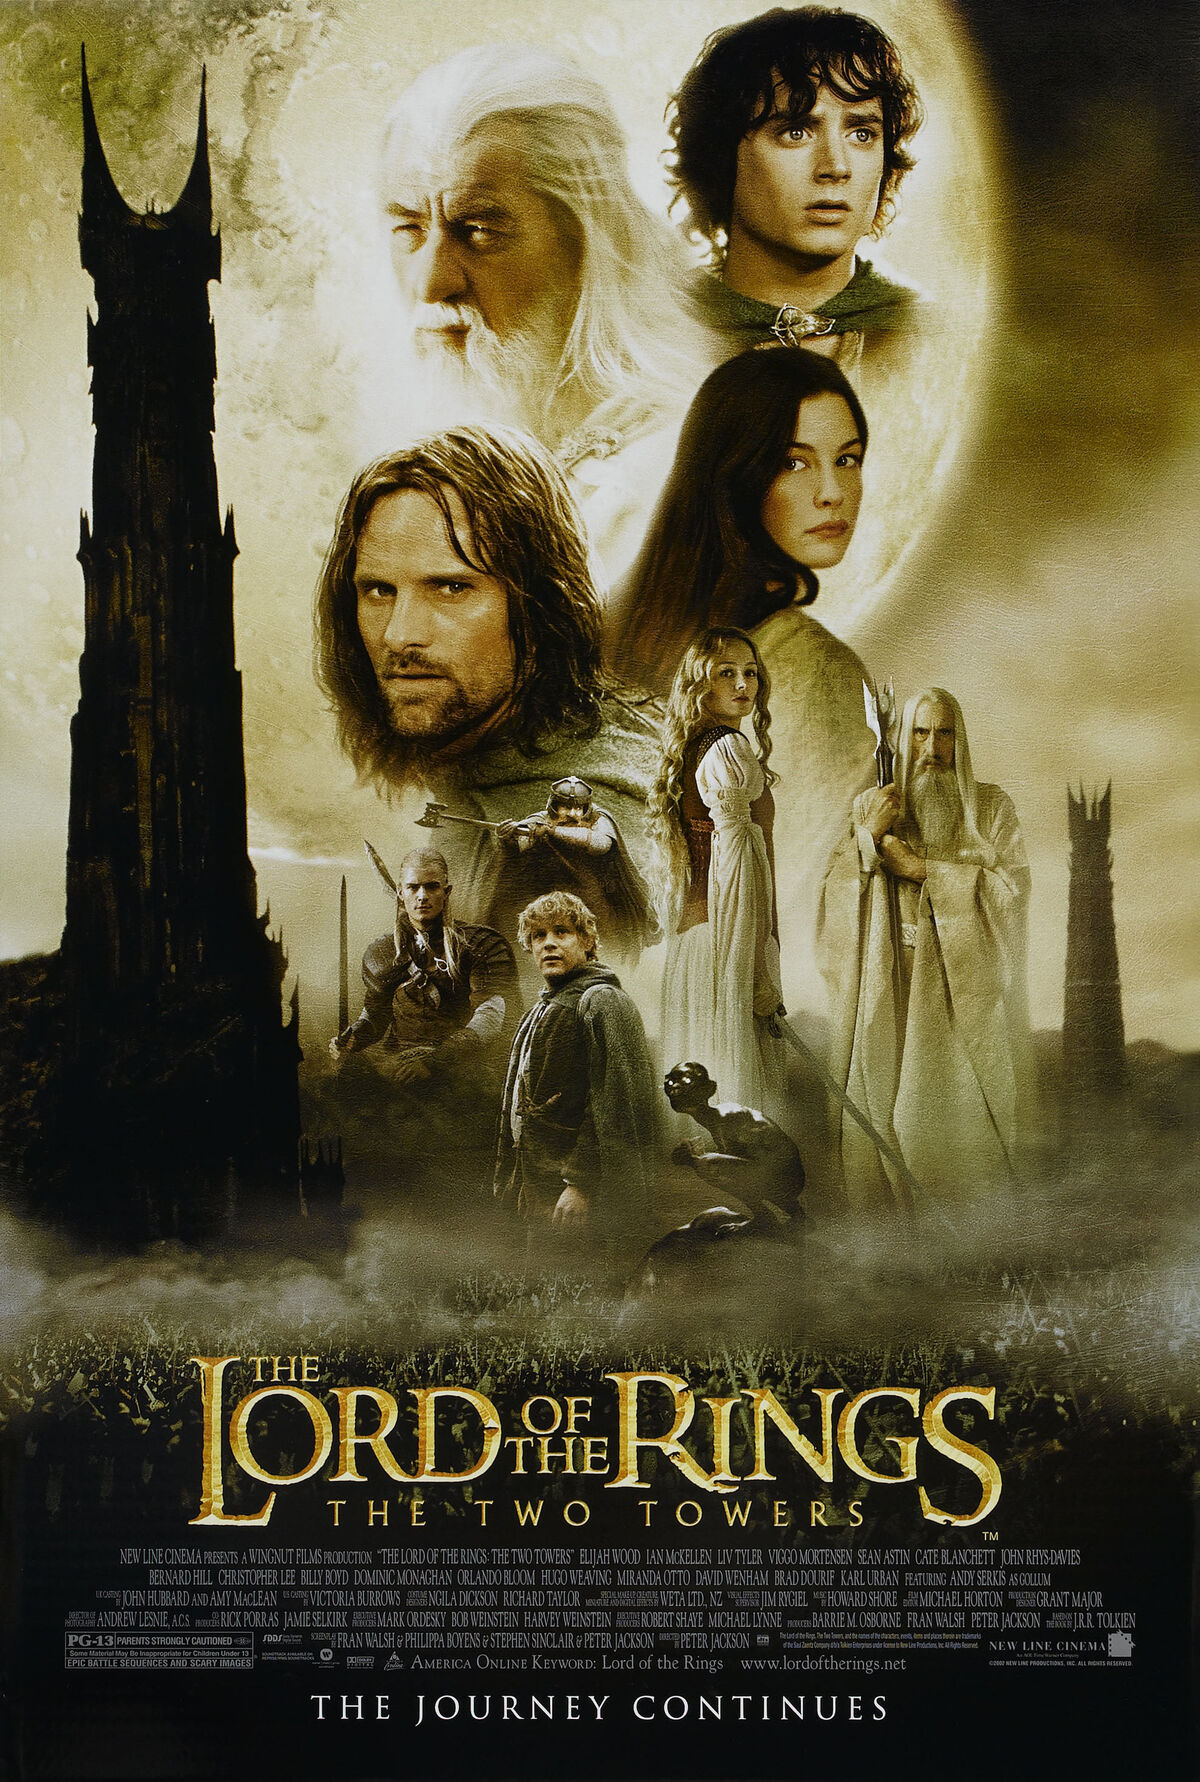 The Lord of the Rings: The Return of the King | Rotten Tomatoes